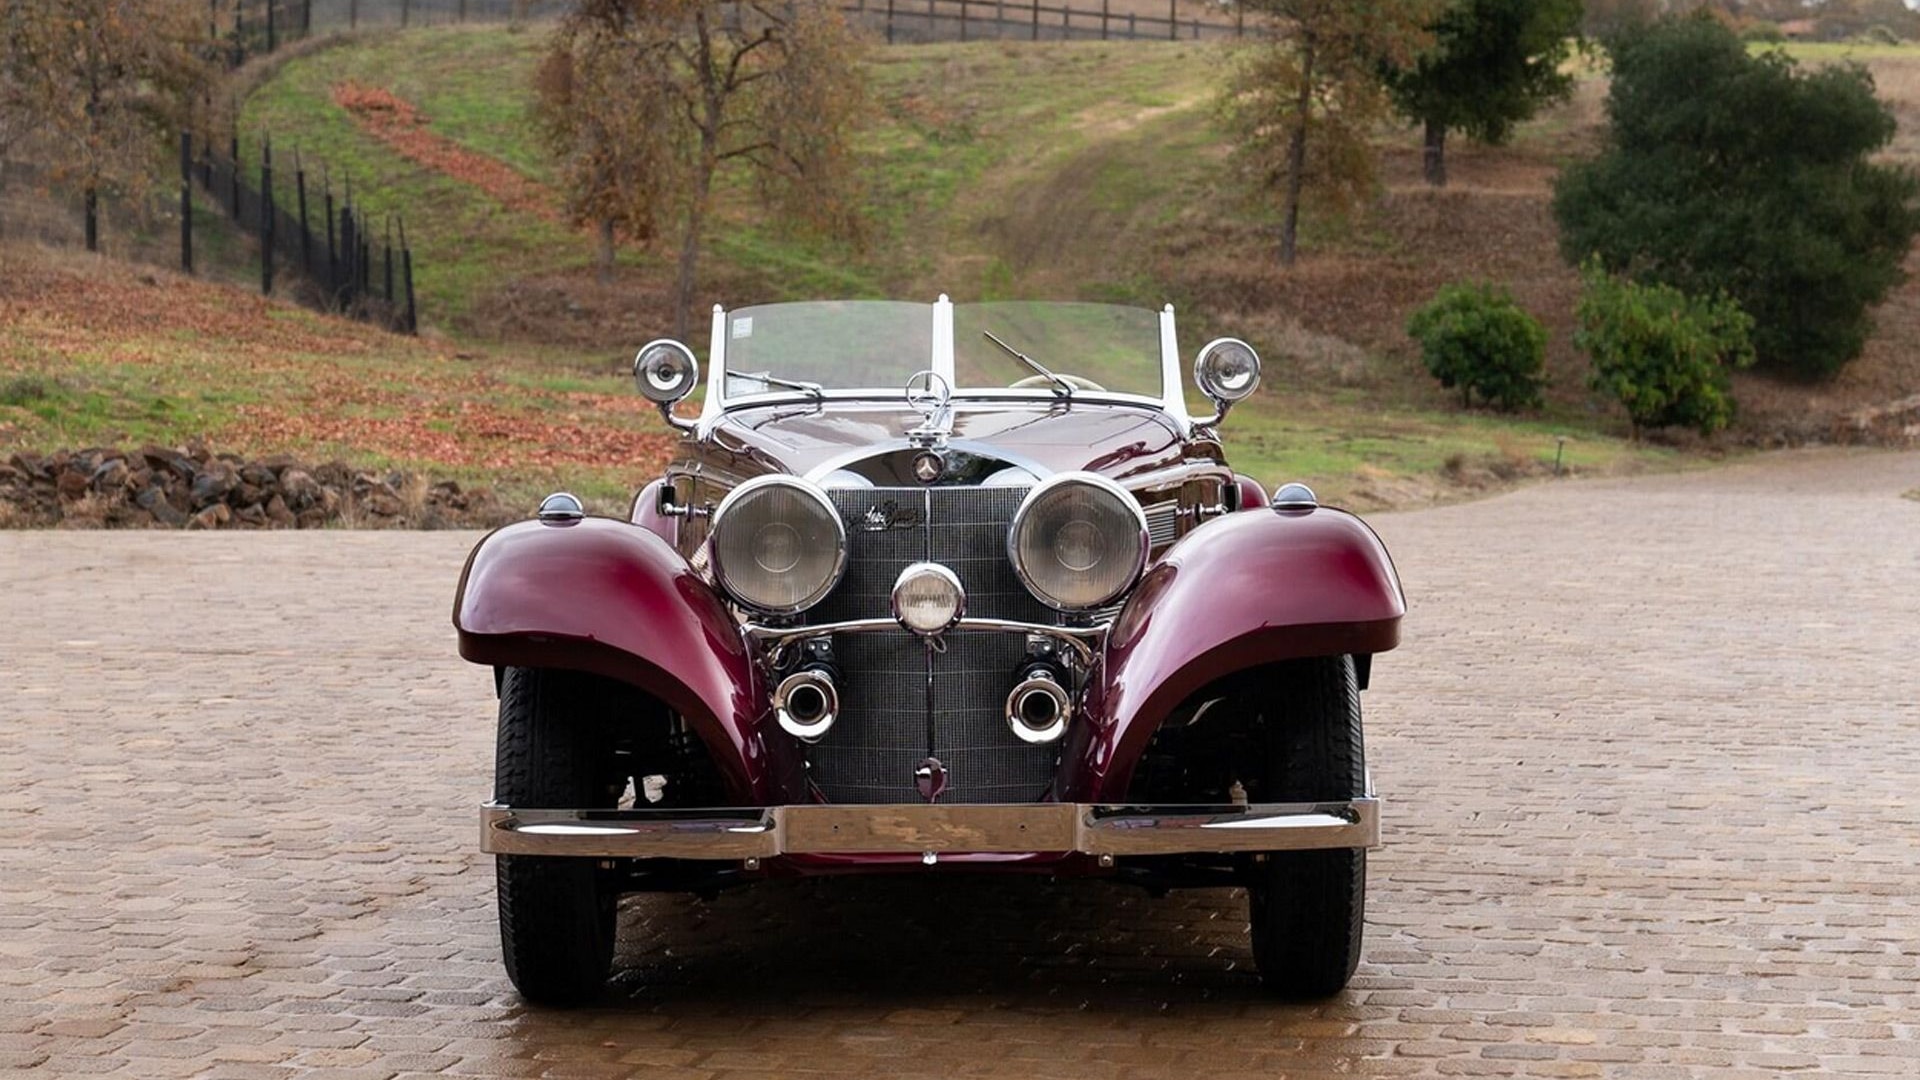 1938 Mercedes-Benz 540K Special Roadster bearing chassis no. 408338 - Photo credit: RM Sotheby's